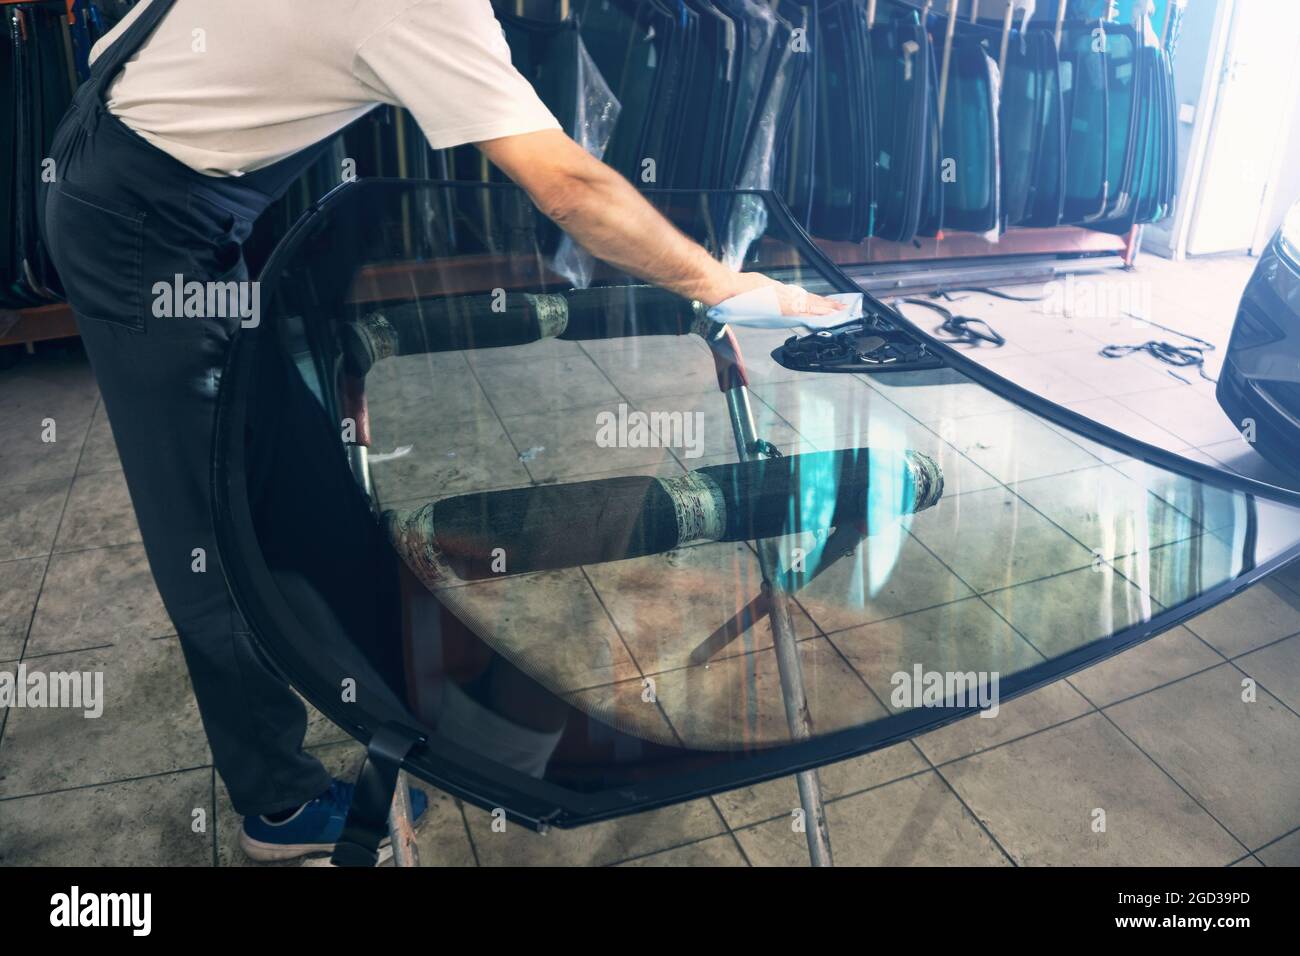 Automobile glazier worker degreases glass windscreen or windshield before installation on car in service station garage. Stock Photo